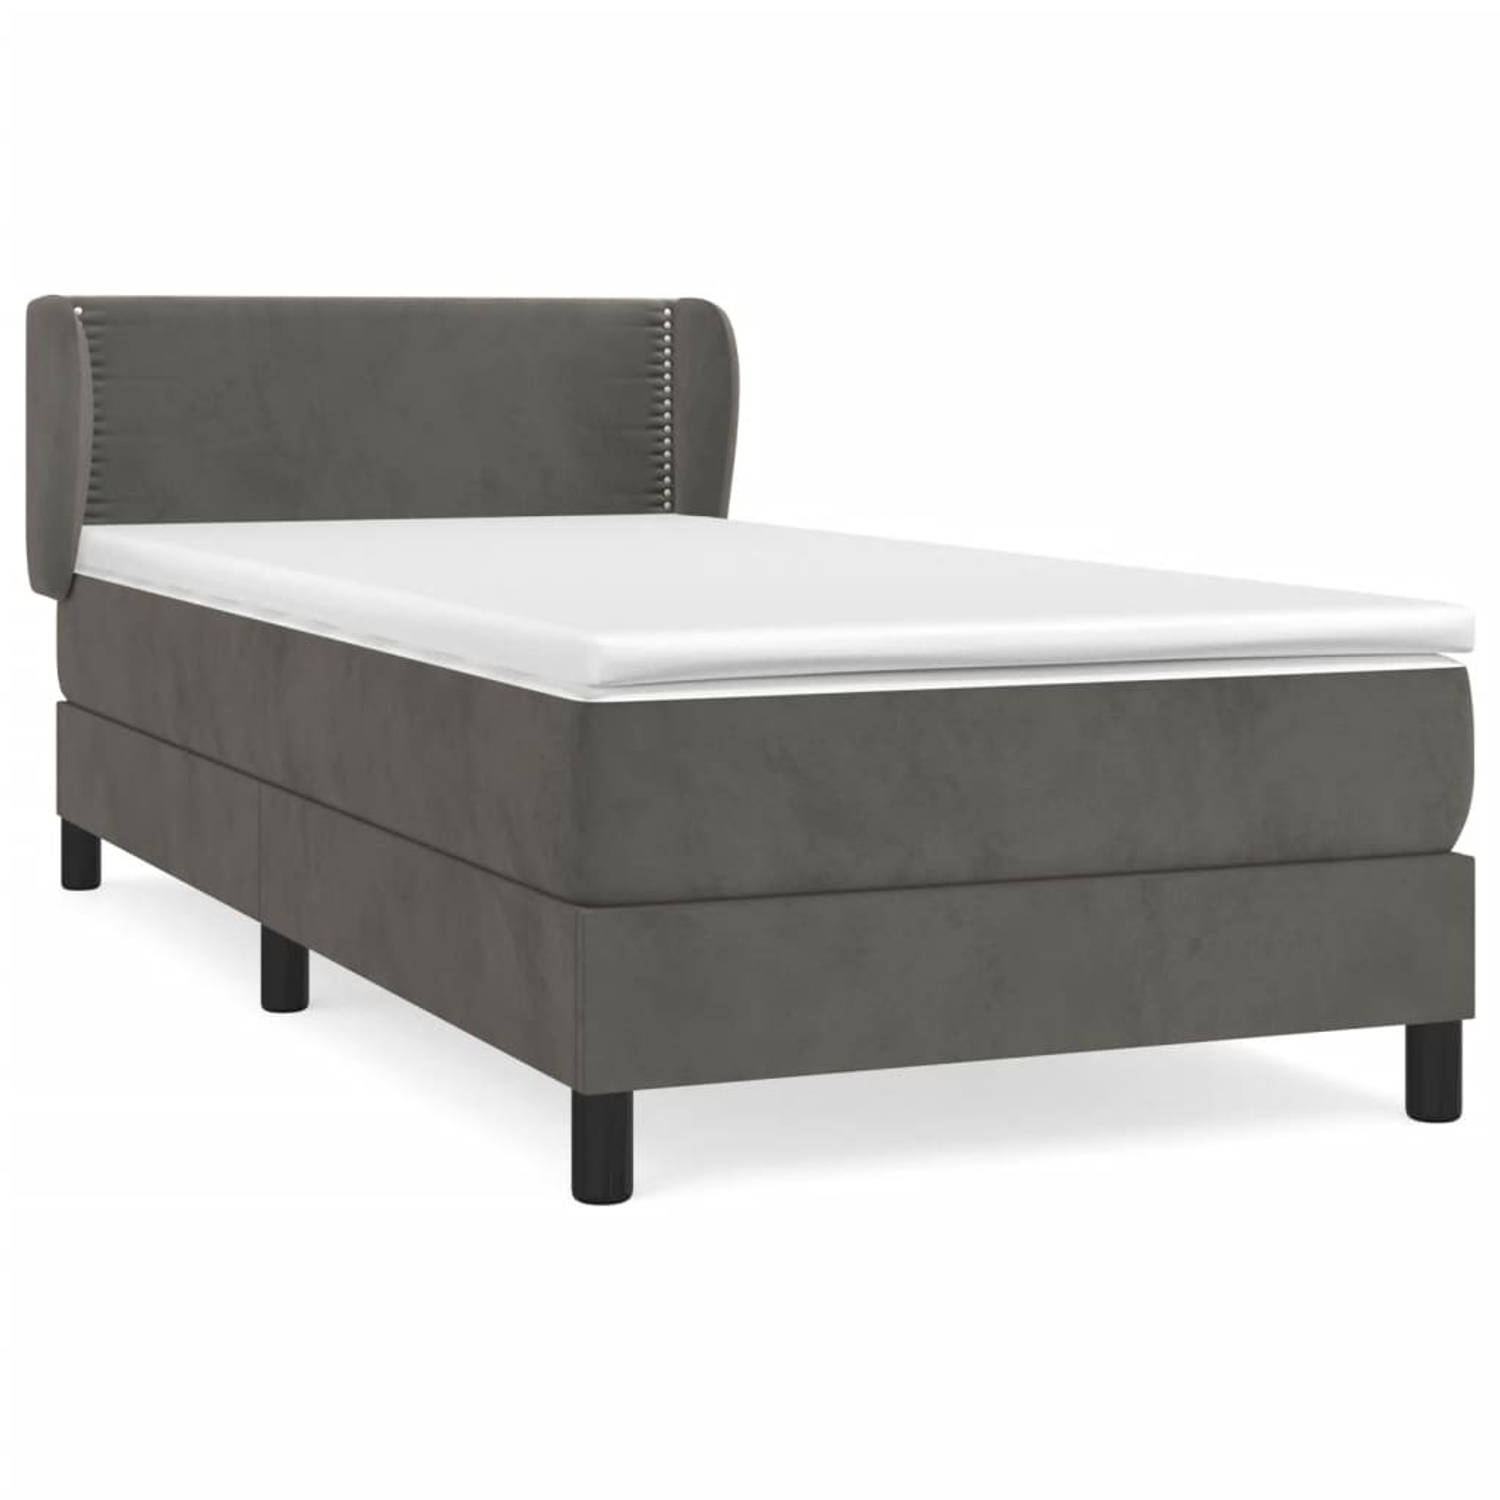 The Living Store Bed Serina - Boxspringbed 80x200 - Donkergrijs Fluweel